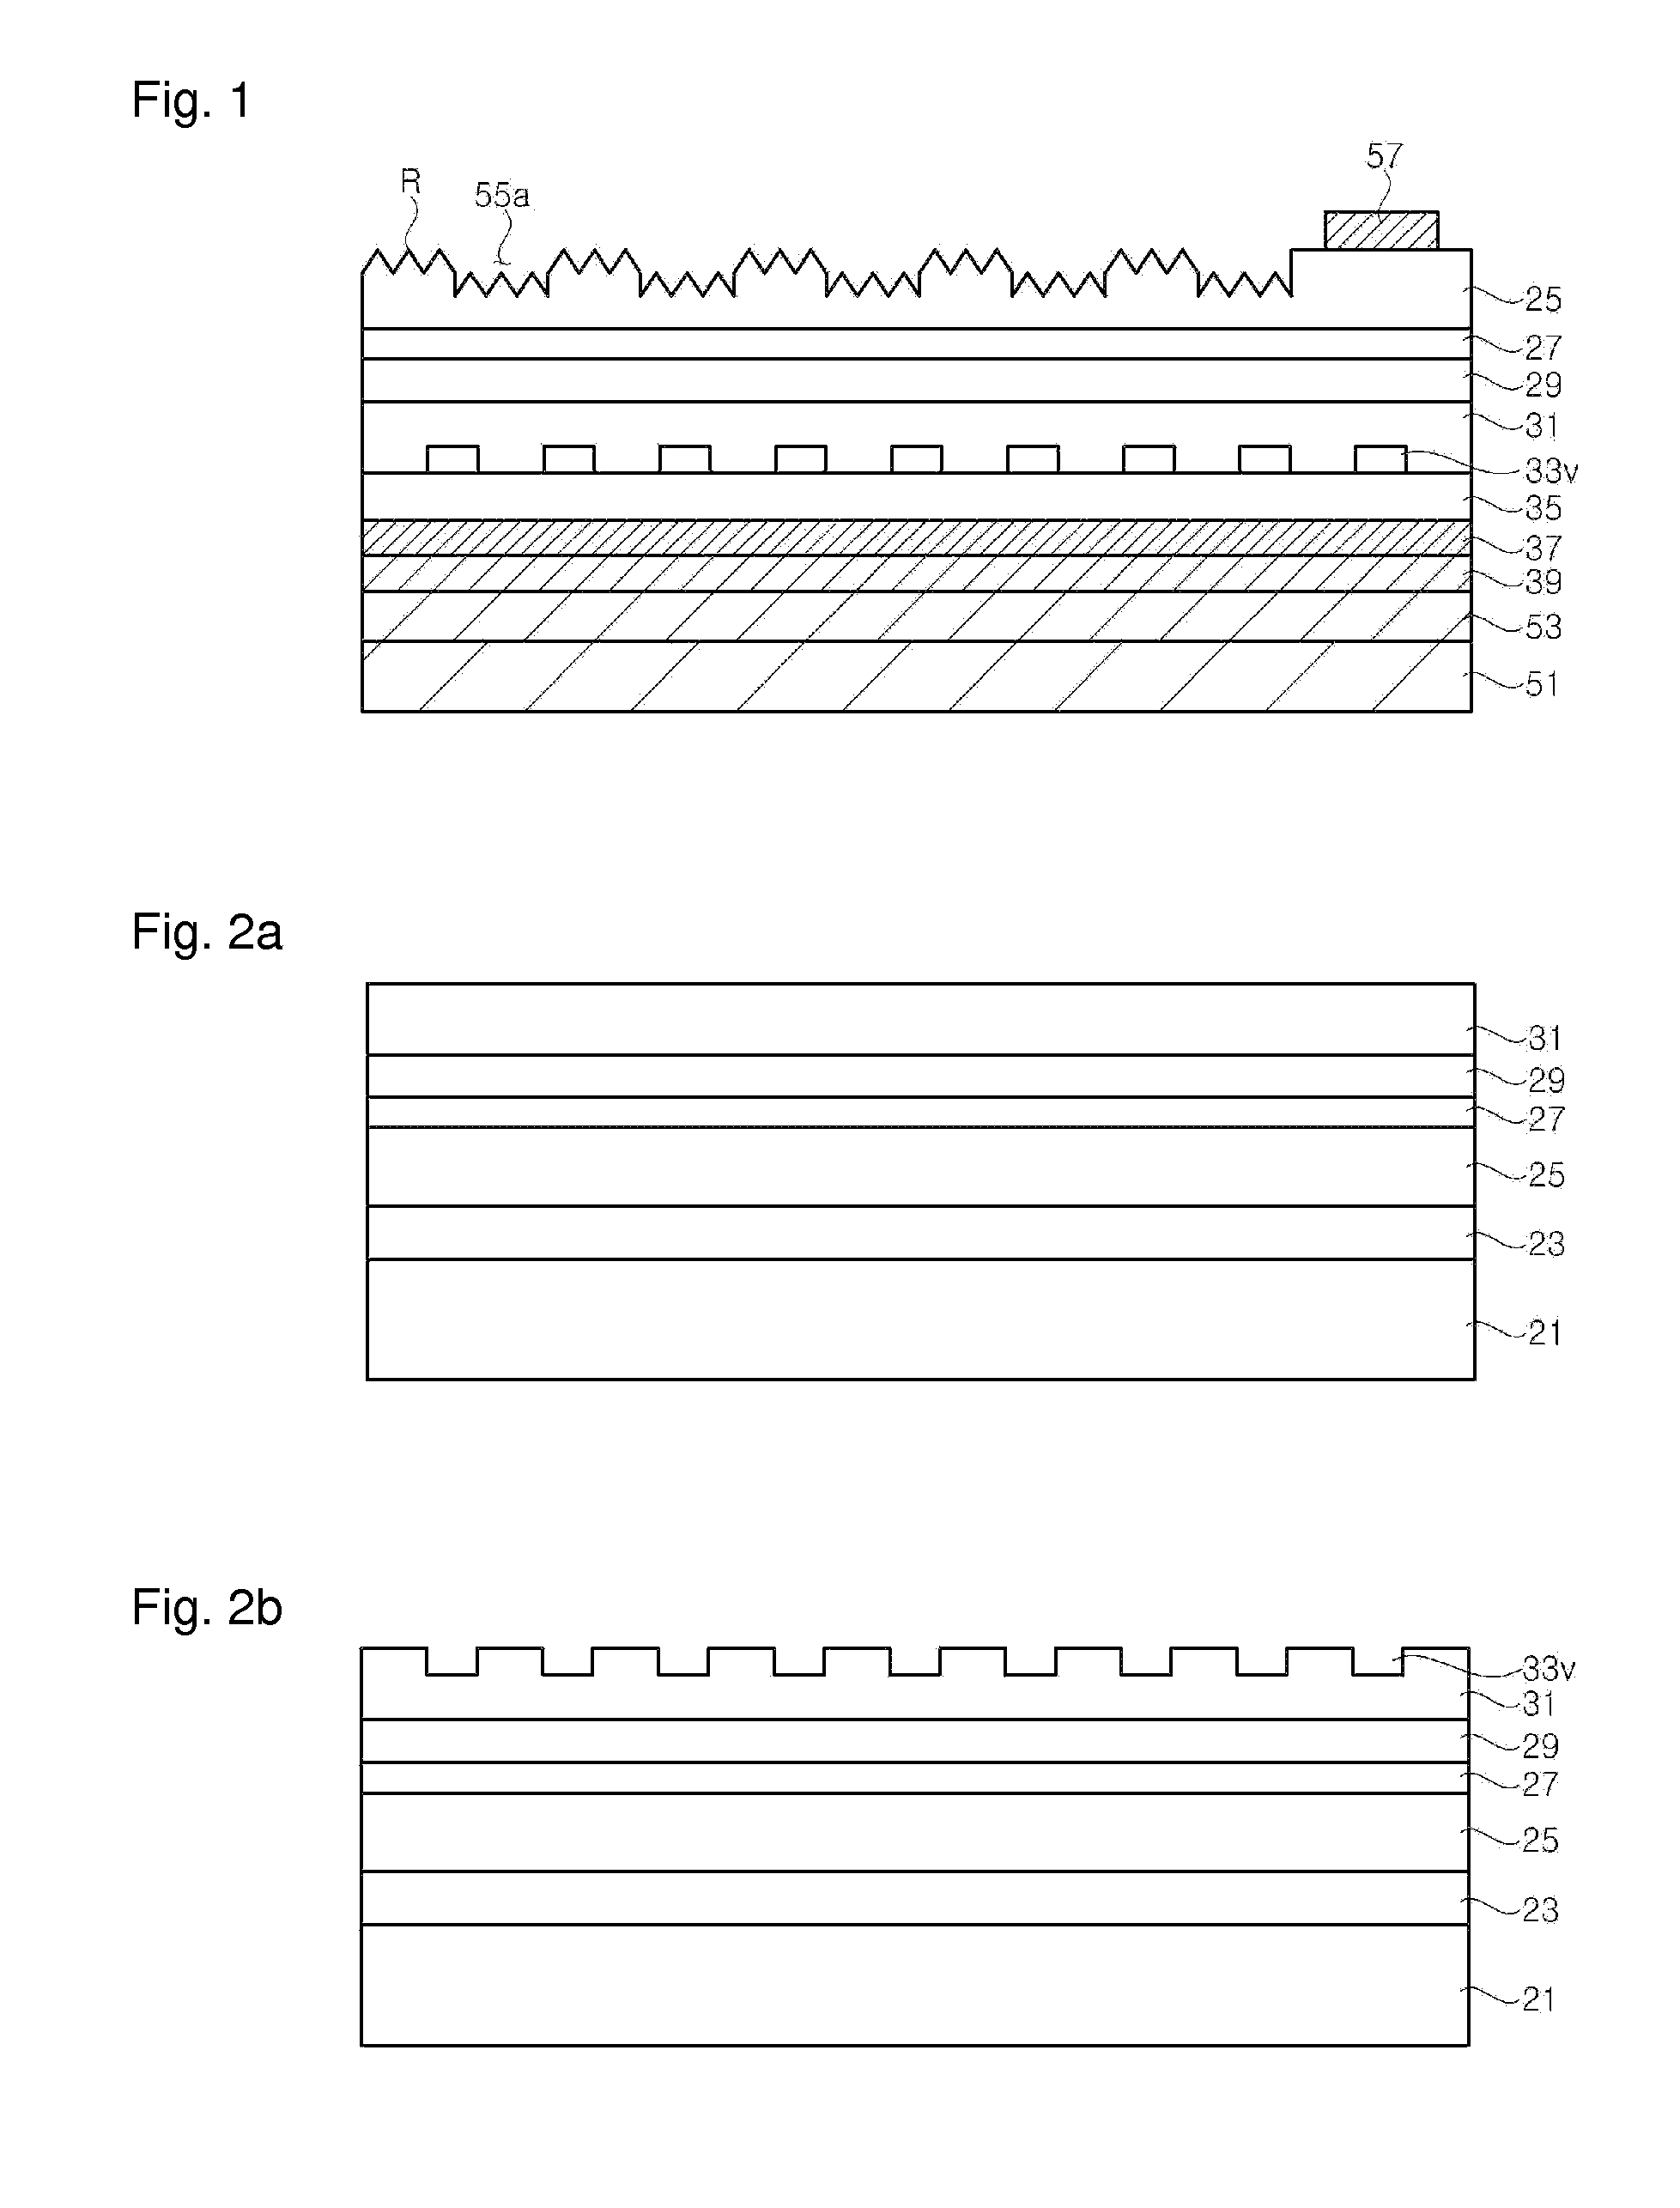 Non-polar light emitting diode having photonic crystal structure and method of fabricating the same